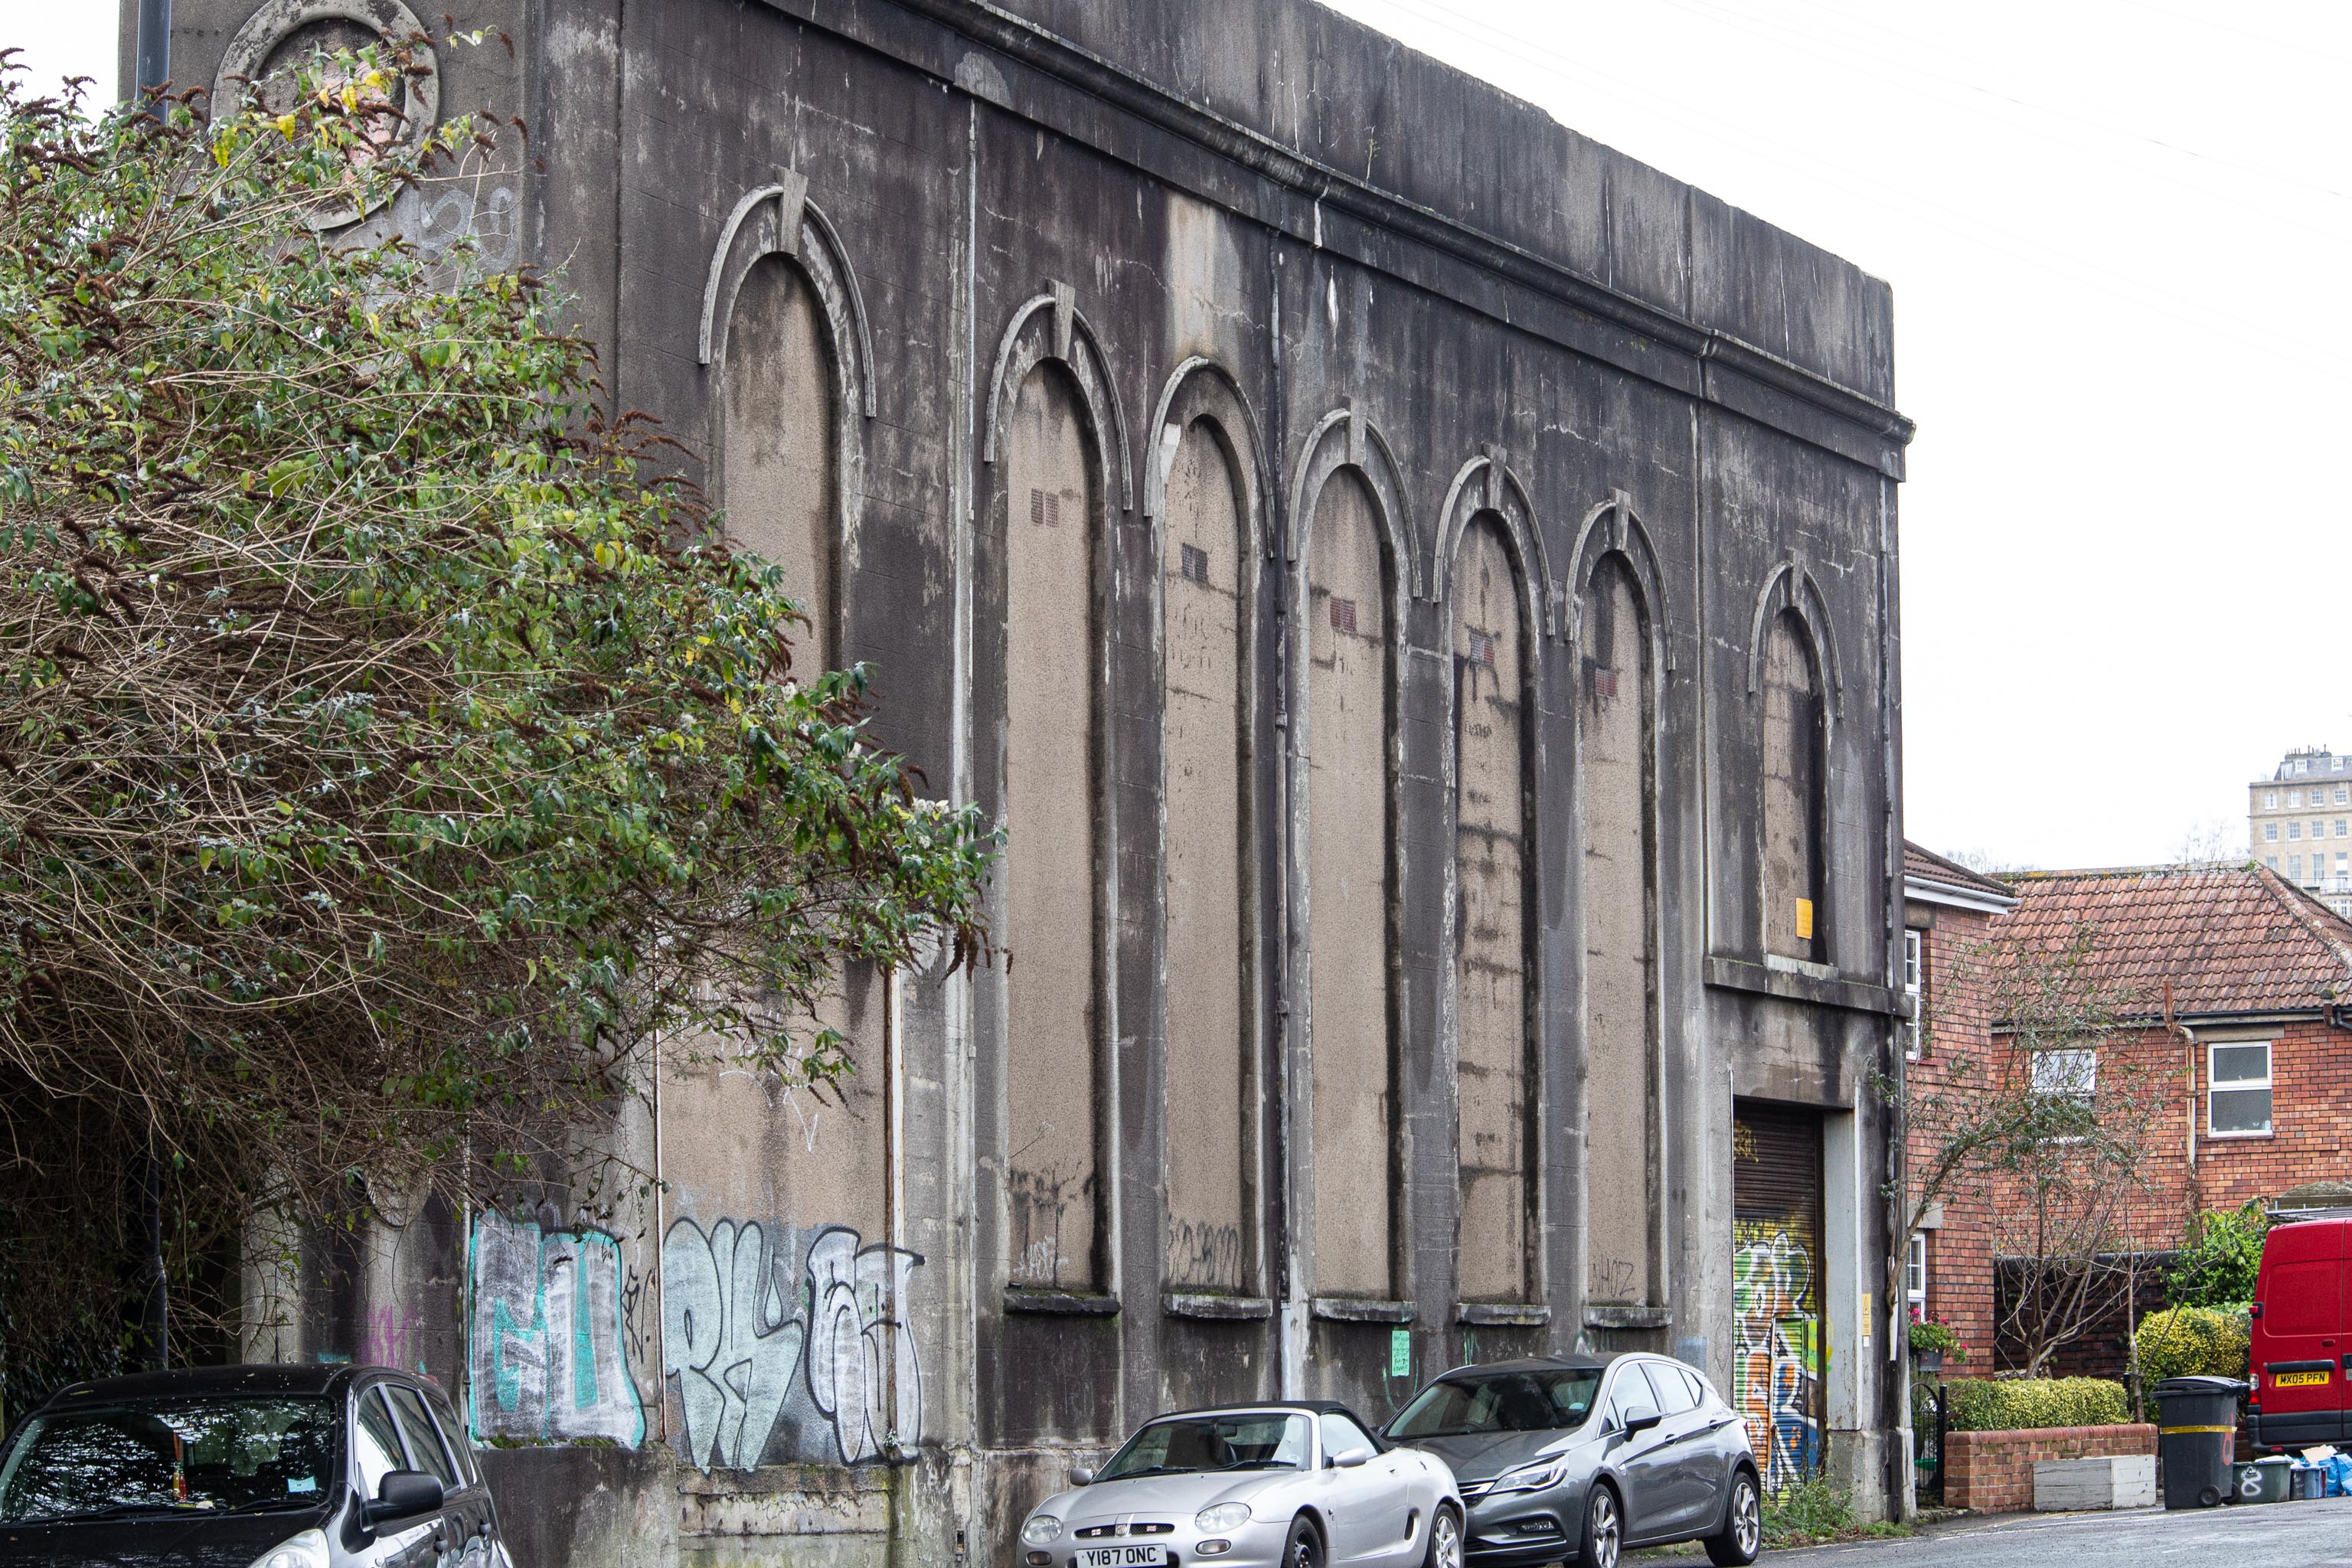 Substation
"A dramatic modern space behind a conventional facade; The Underfall Yard electricity substation on Avon Crescent was begun in 1905. It was probabl...